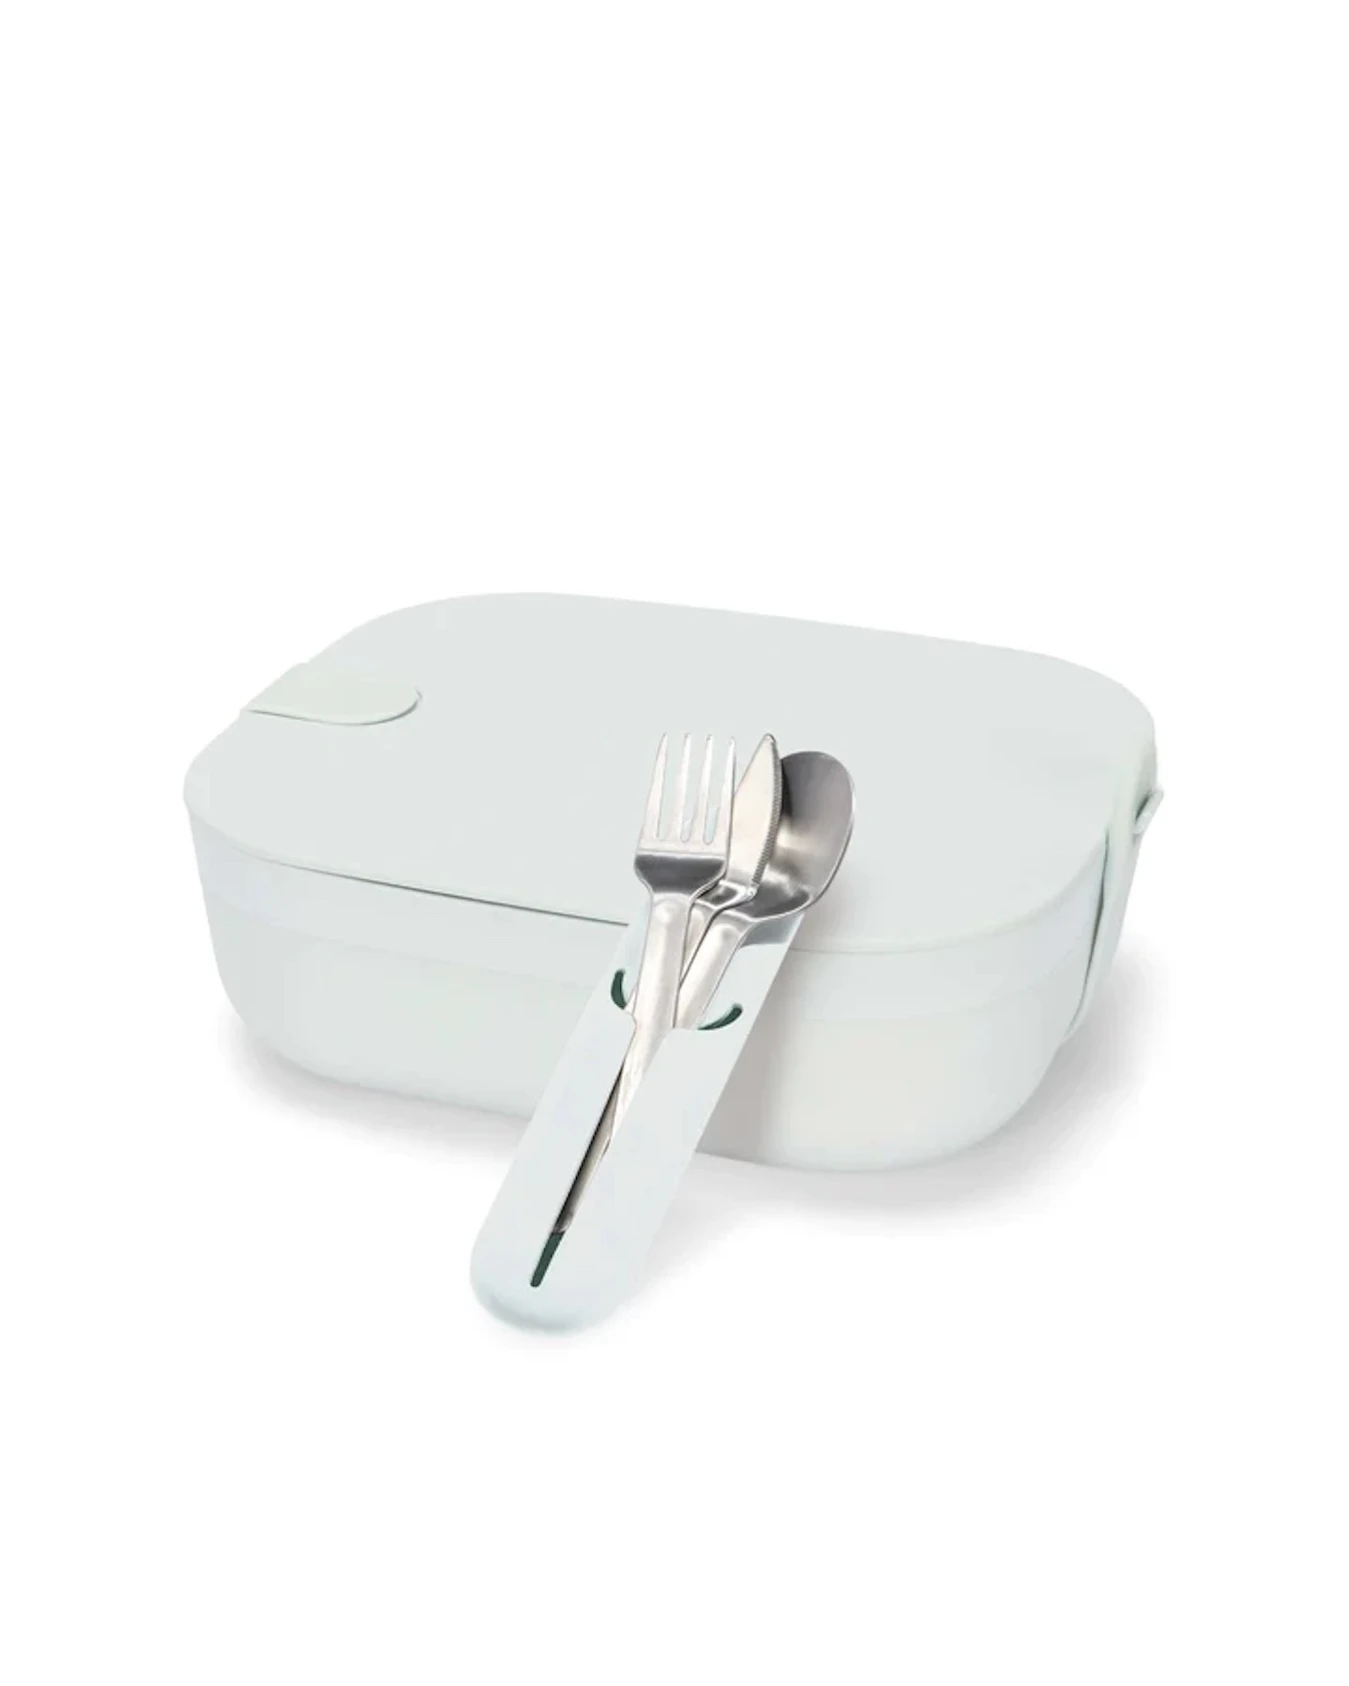 A Bento-inspired hard, rectangular lunch box sits aside an accompanying silverware set of a fork and spoon in a silicone sleeve.